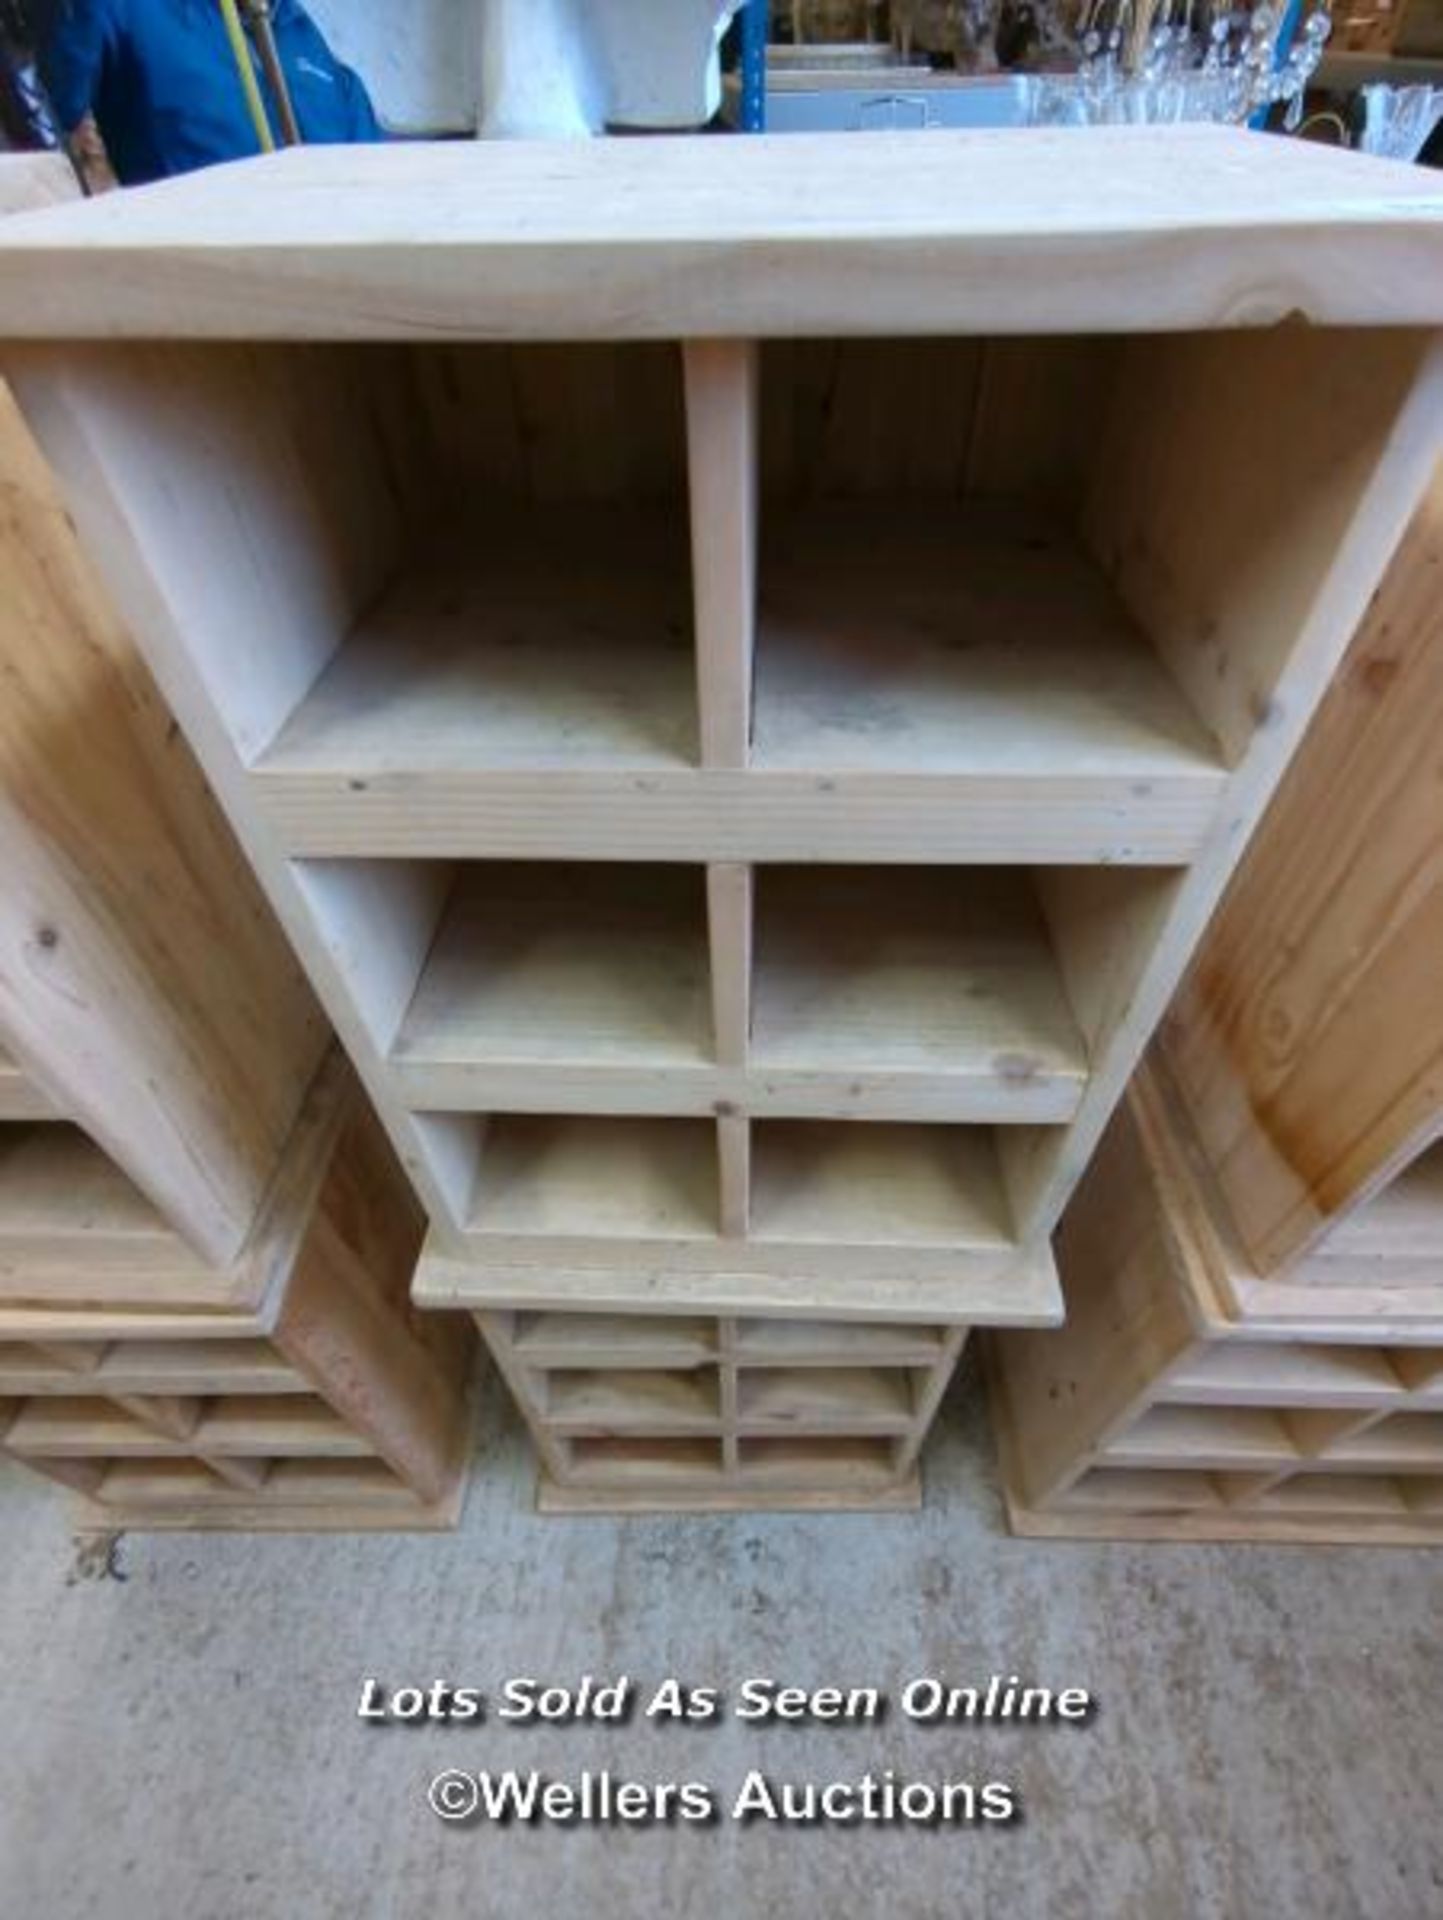 *PAIR OF PINE STORAGE SHELVES WITH SIX COMPARTMENTS, 26 HIGH X 19.5 WIDE X 15 DEEP / ALL LOTS ARE - Image 2 of 3